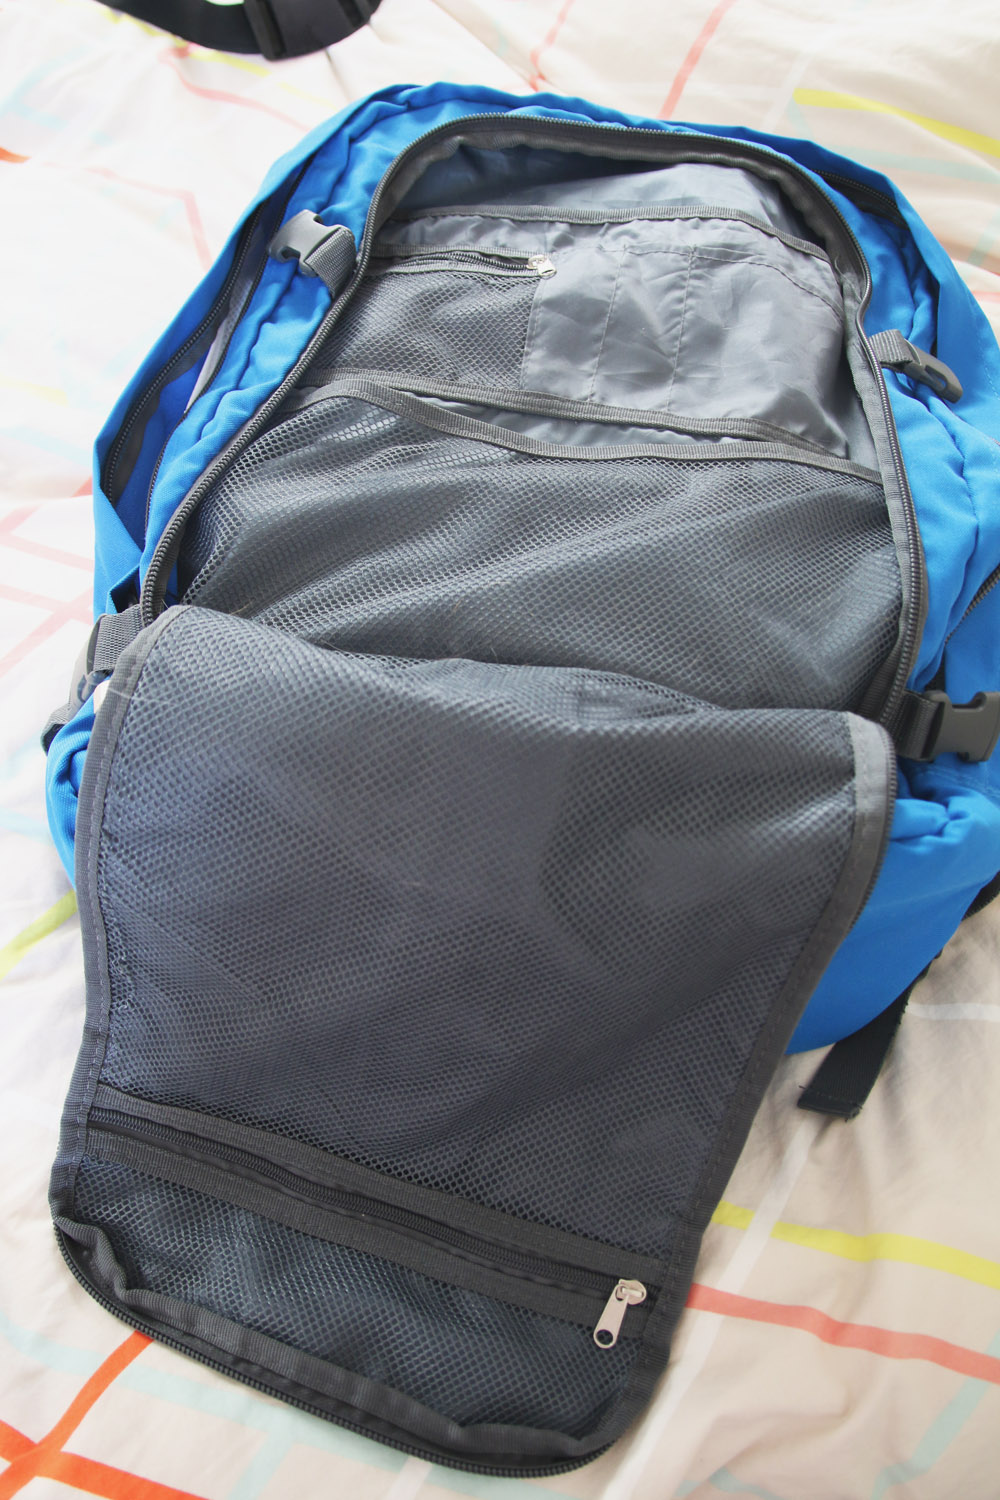 Cabin Max Metz 30 Litre Backpack Review